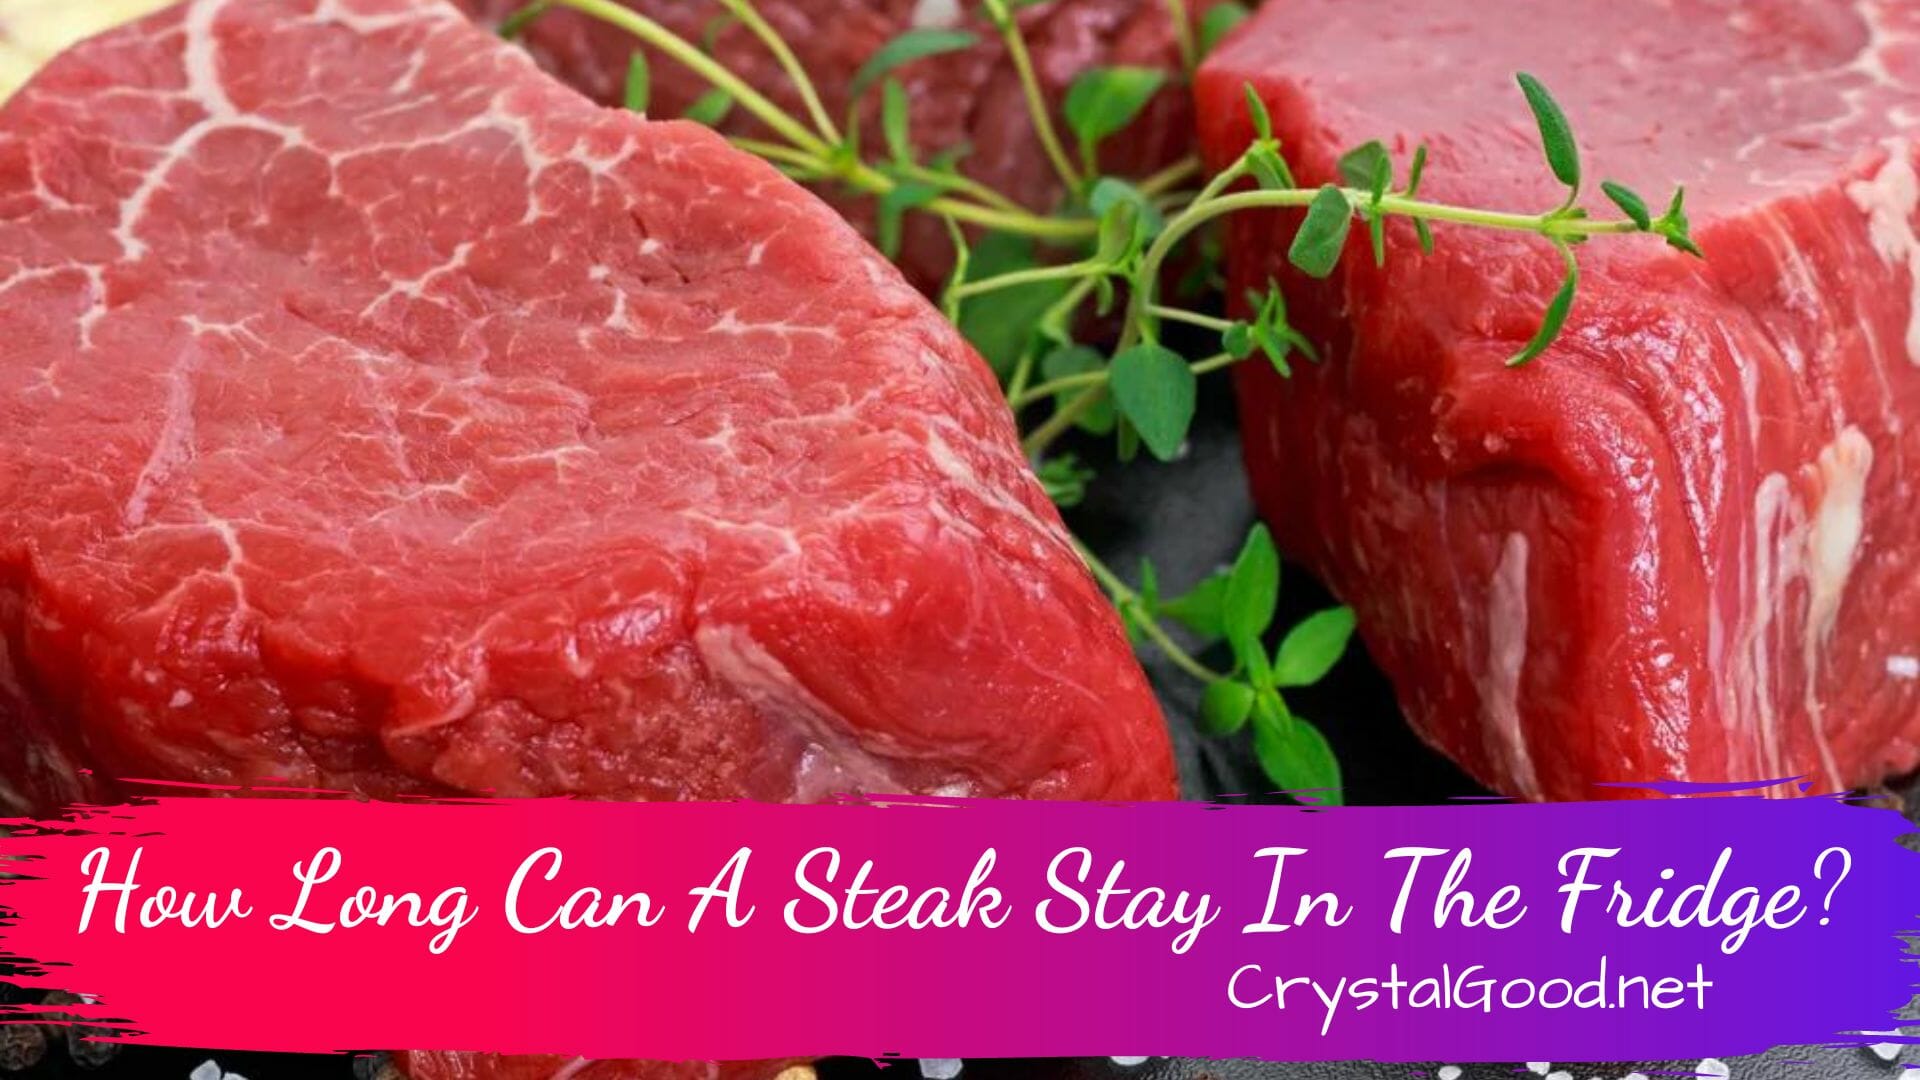 How Long Can A Steak Sit In The Fridge - How Long Can Steak Stay In The Fridge After Thawing